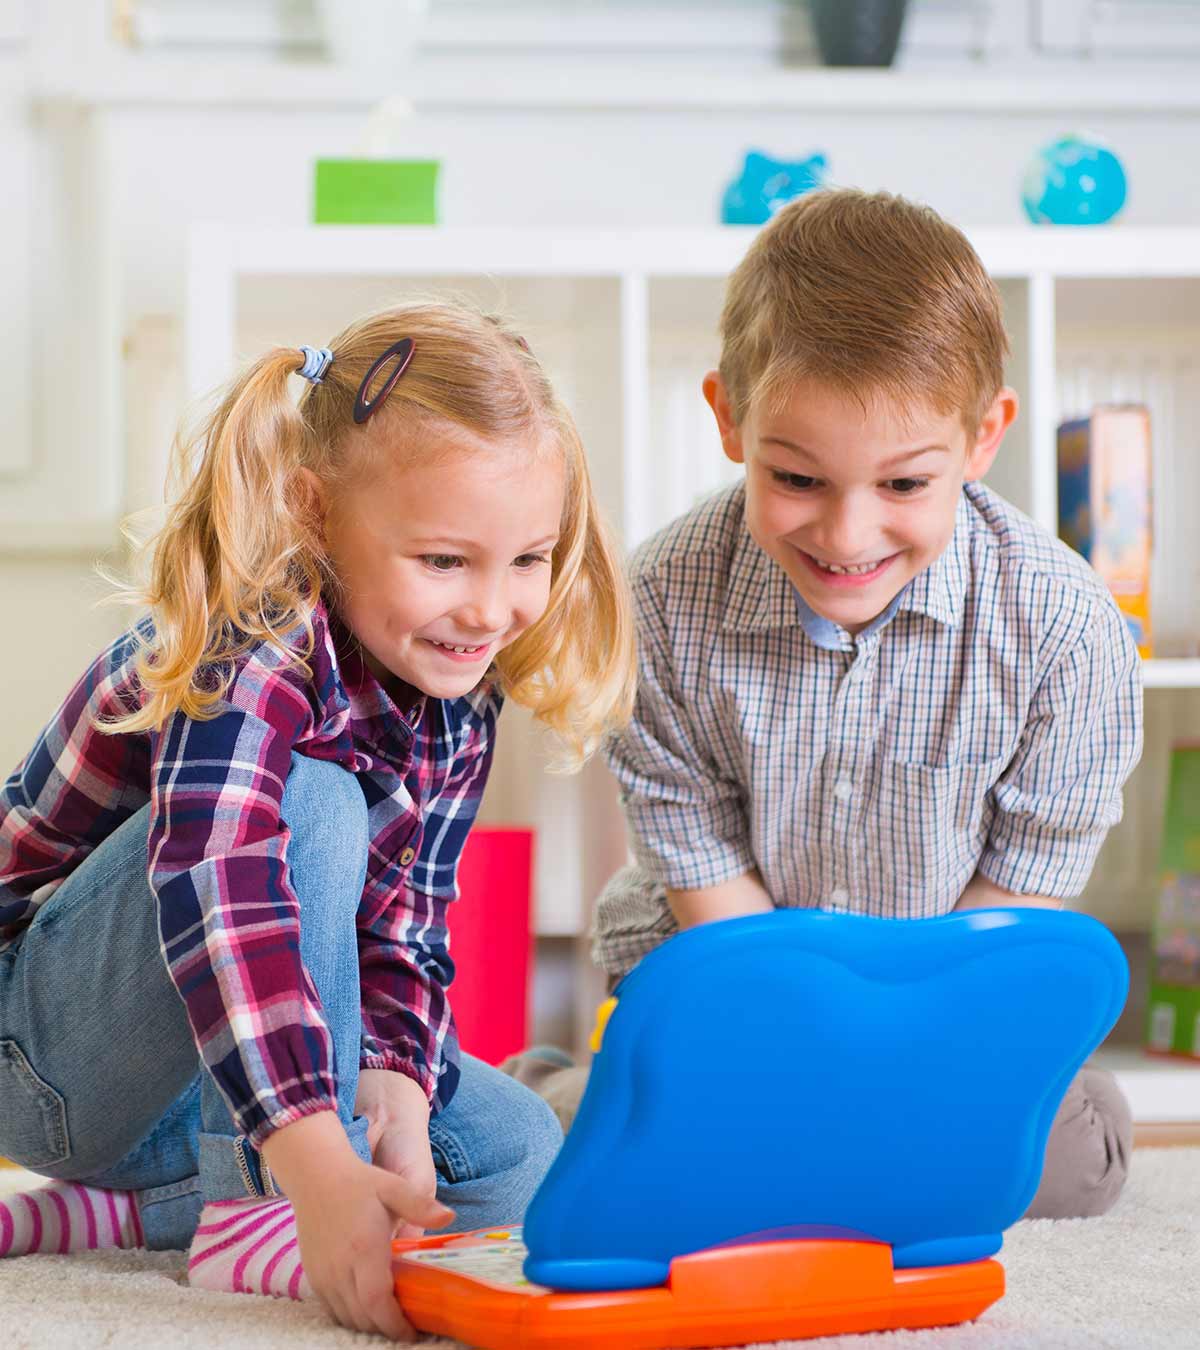 22 Best Laptop Toys For Kids To Buy In 2020